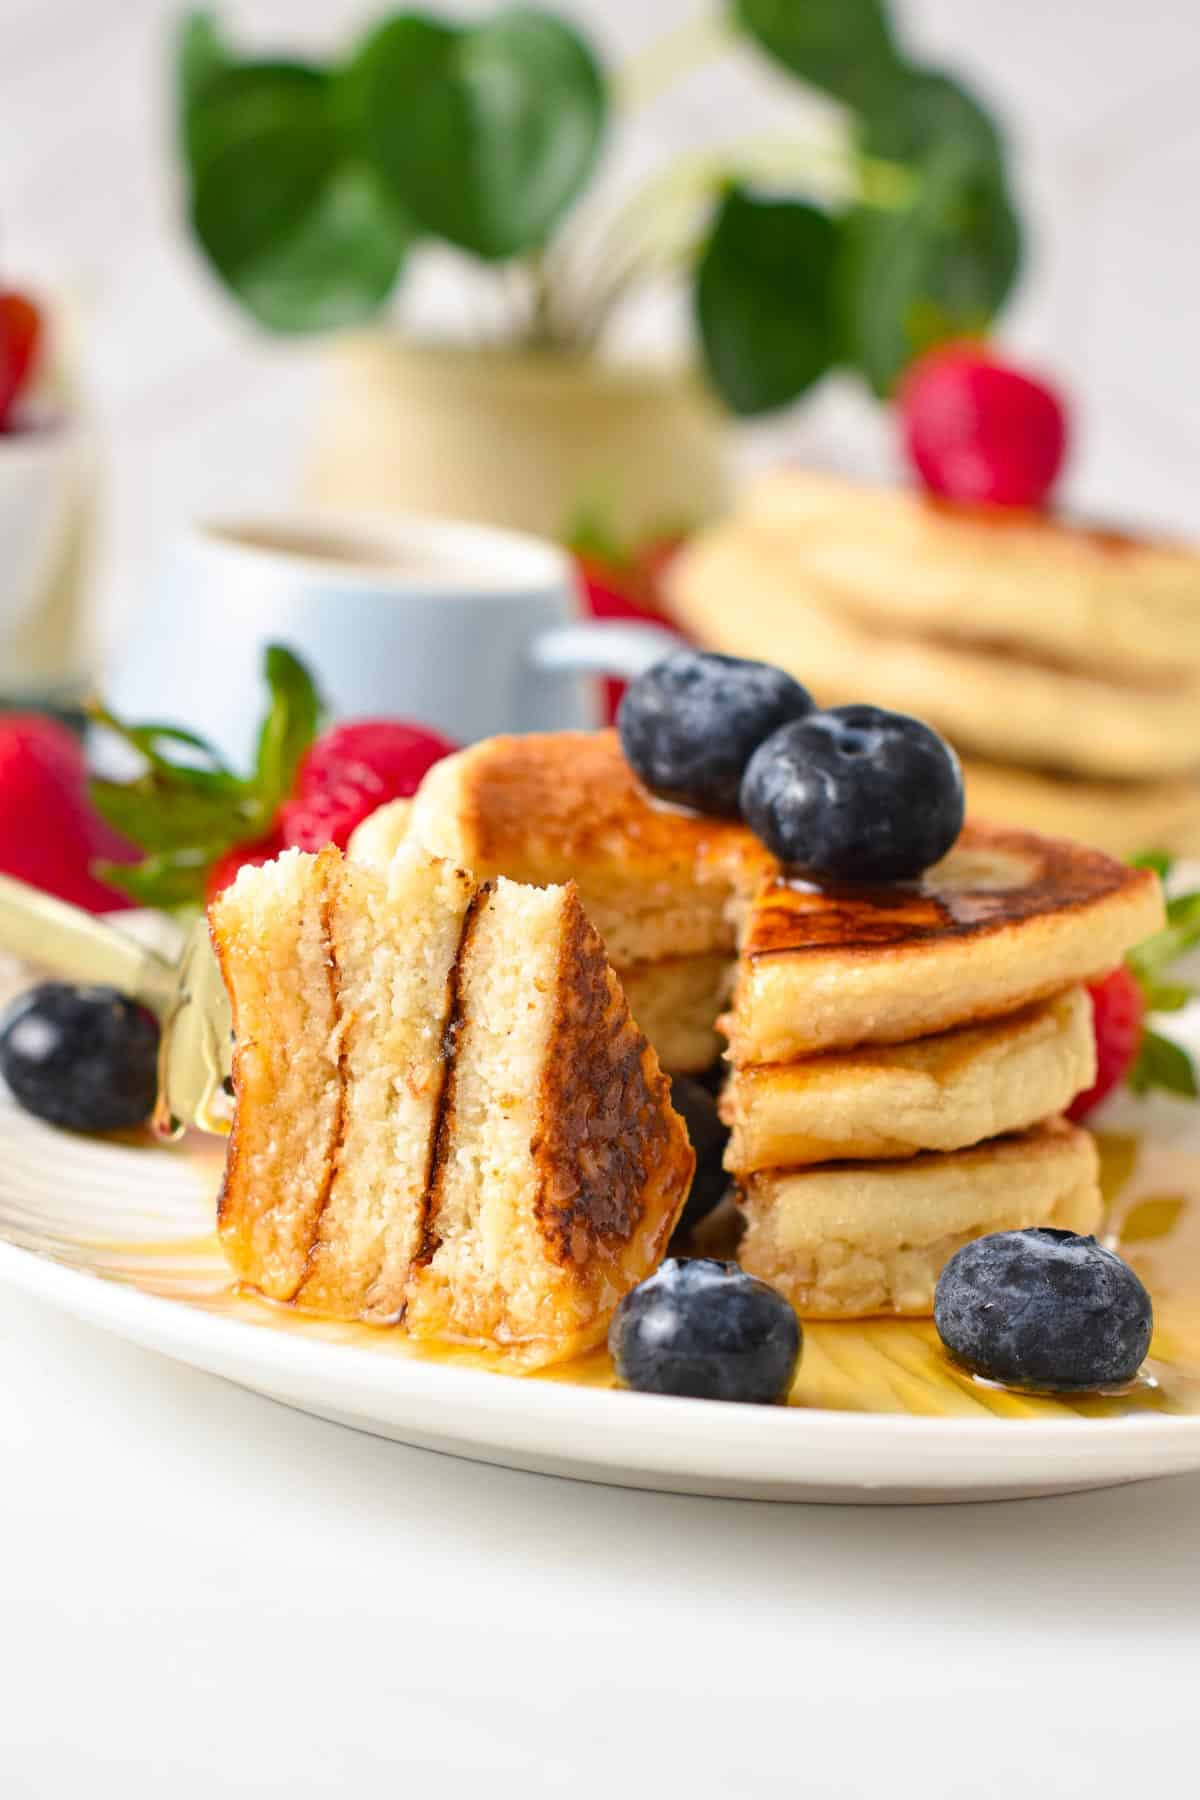 A stack of Vegan Coconut Flour Pancakes sliced in the middle and showing the fluffy pancake texture inside.